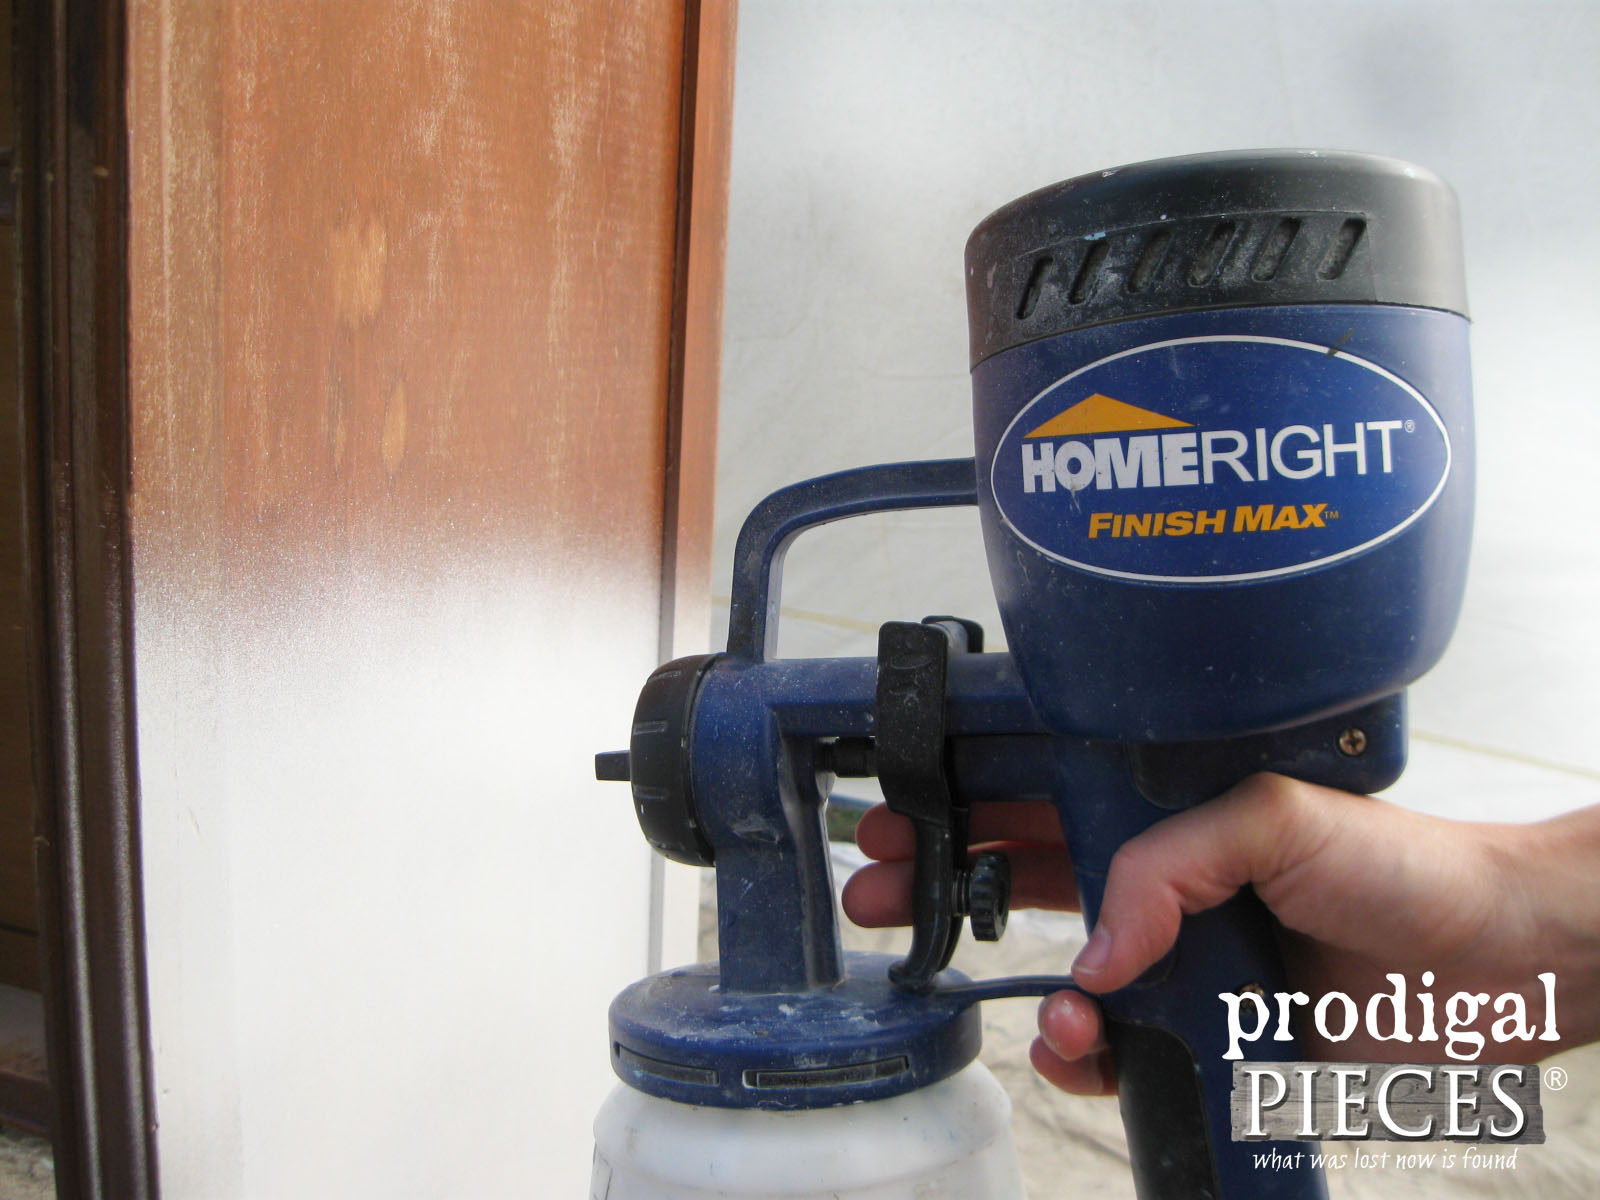 HomeRight Finish Max Paint Sprayer for Furniture Painting | Prodigal Pieces | www.prodigalpieces.com